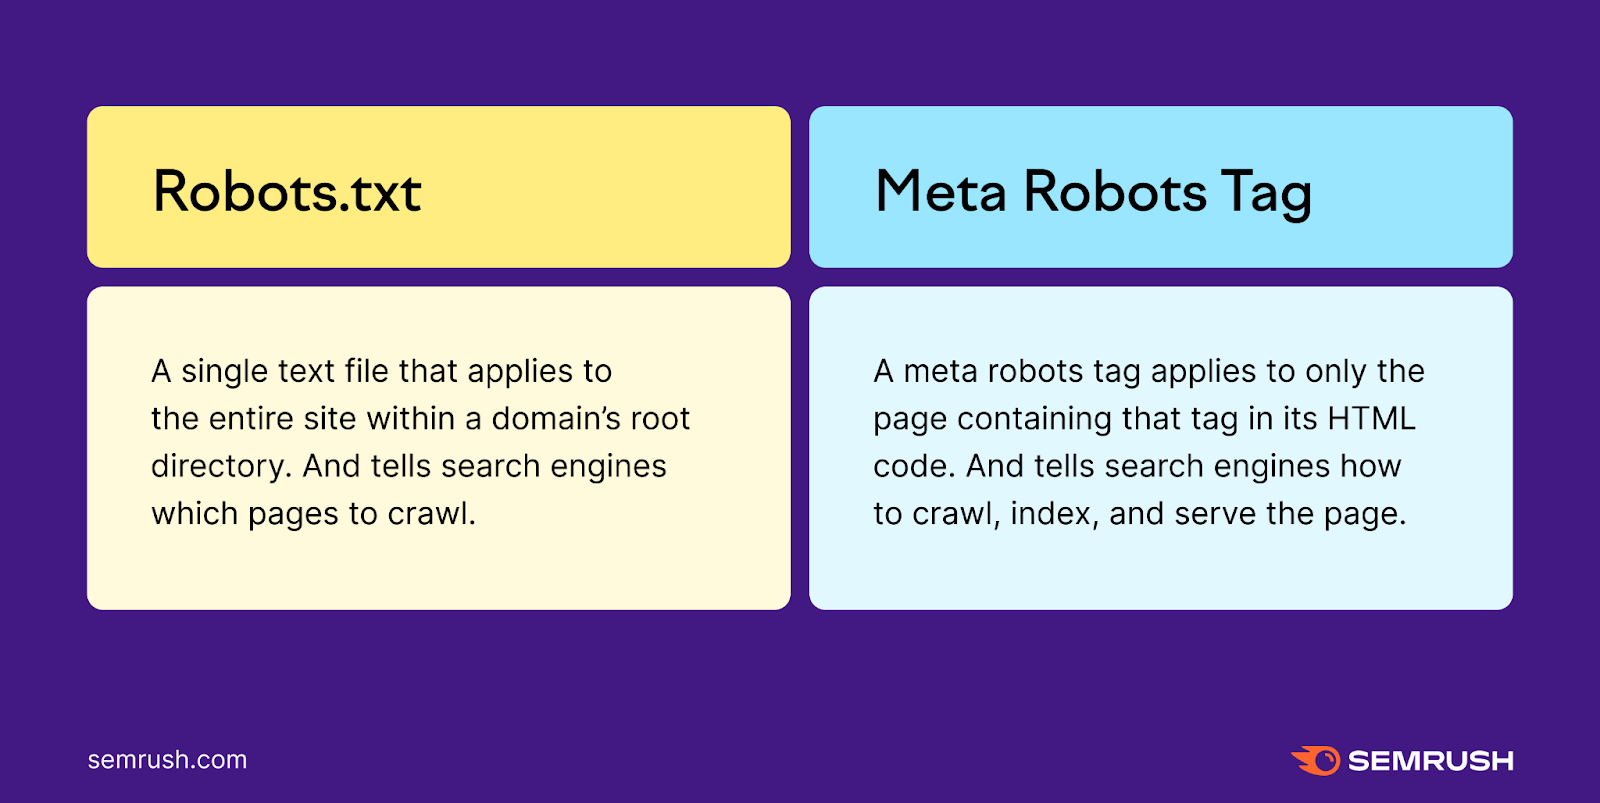 Semrush infographic containing definitions of robots.txt and meta robots tag